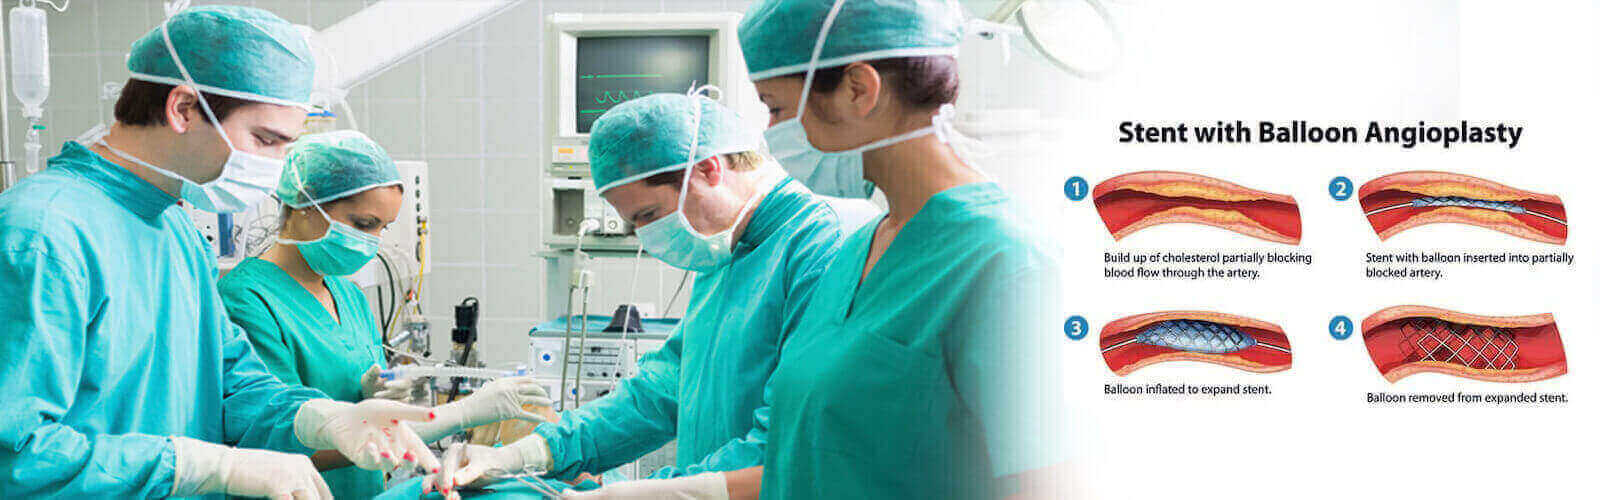 Angioplasty Surgery in Canada